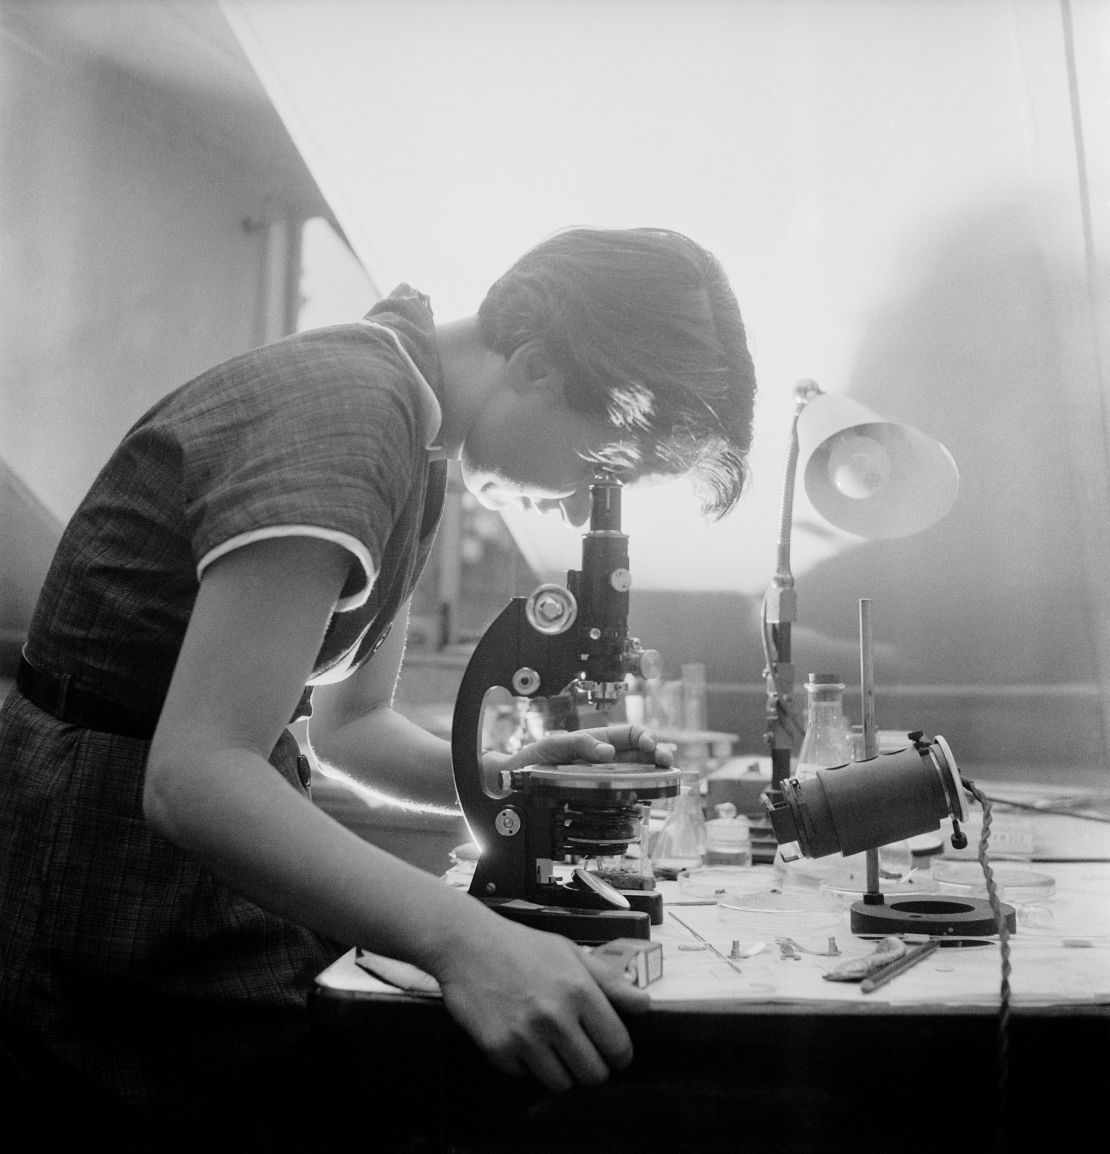 Rosalind Franklin at work in a London laboratory. Her contribution to the understanding of the DNA structure has now been acknowledged, but at the time did not receive full recognition.